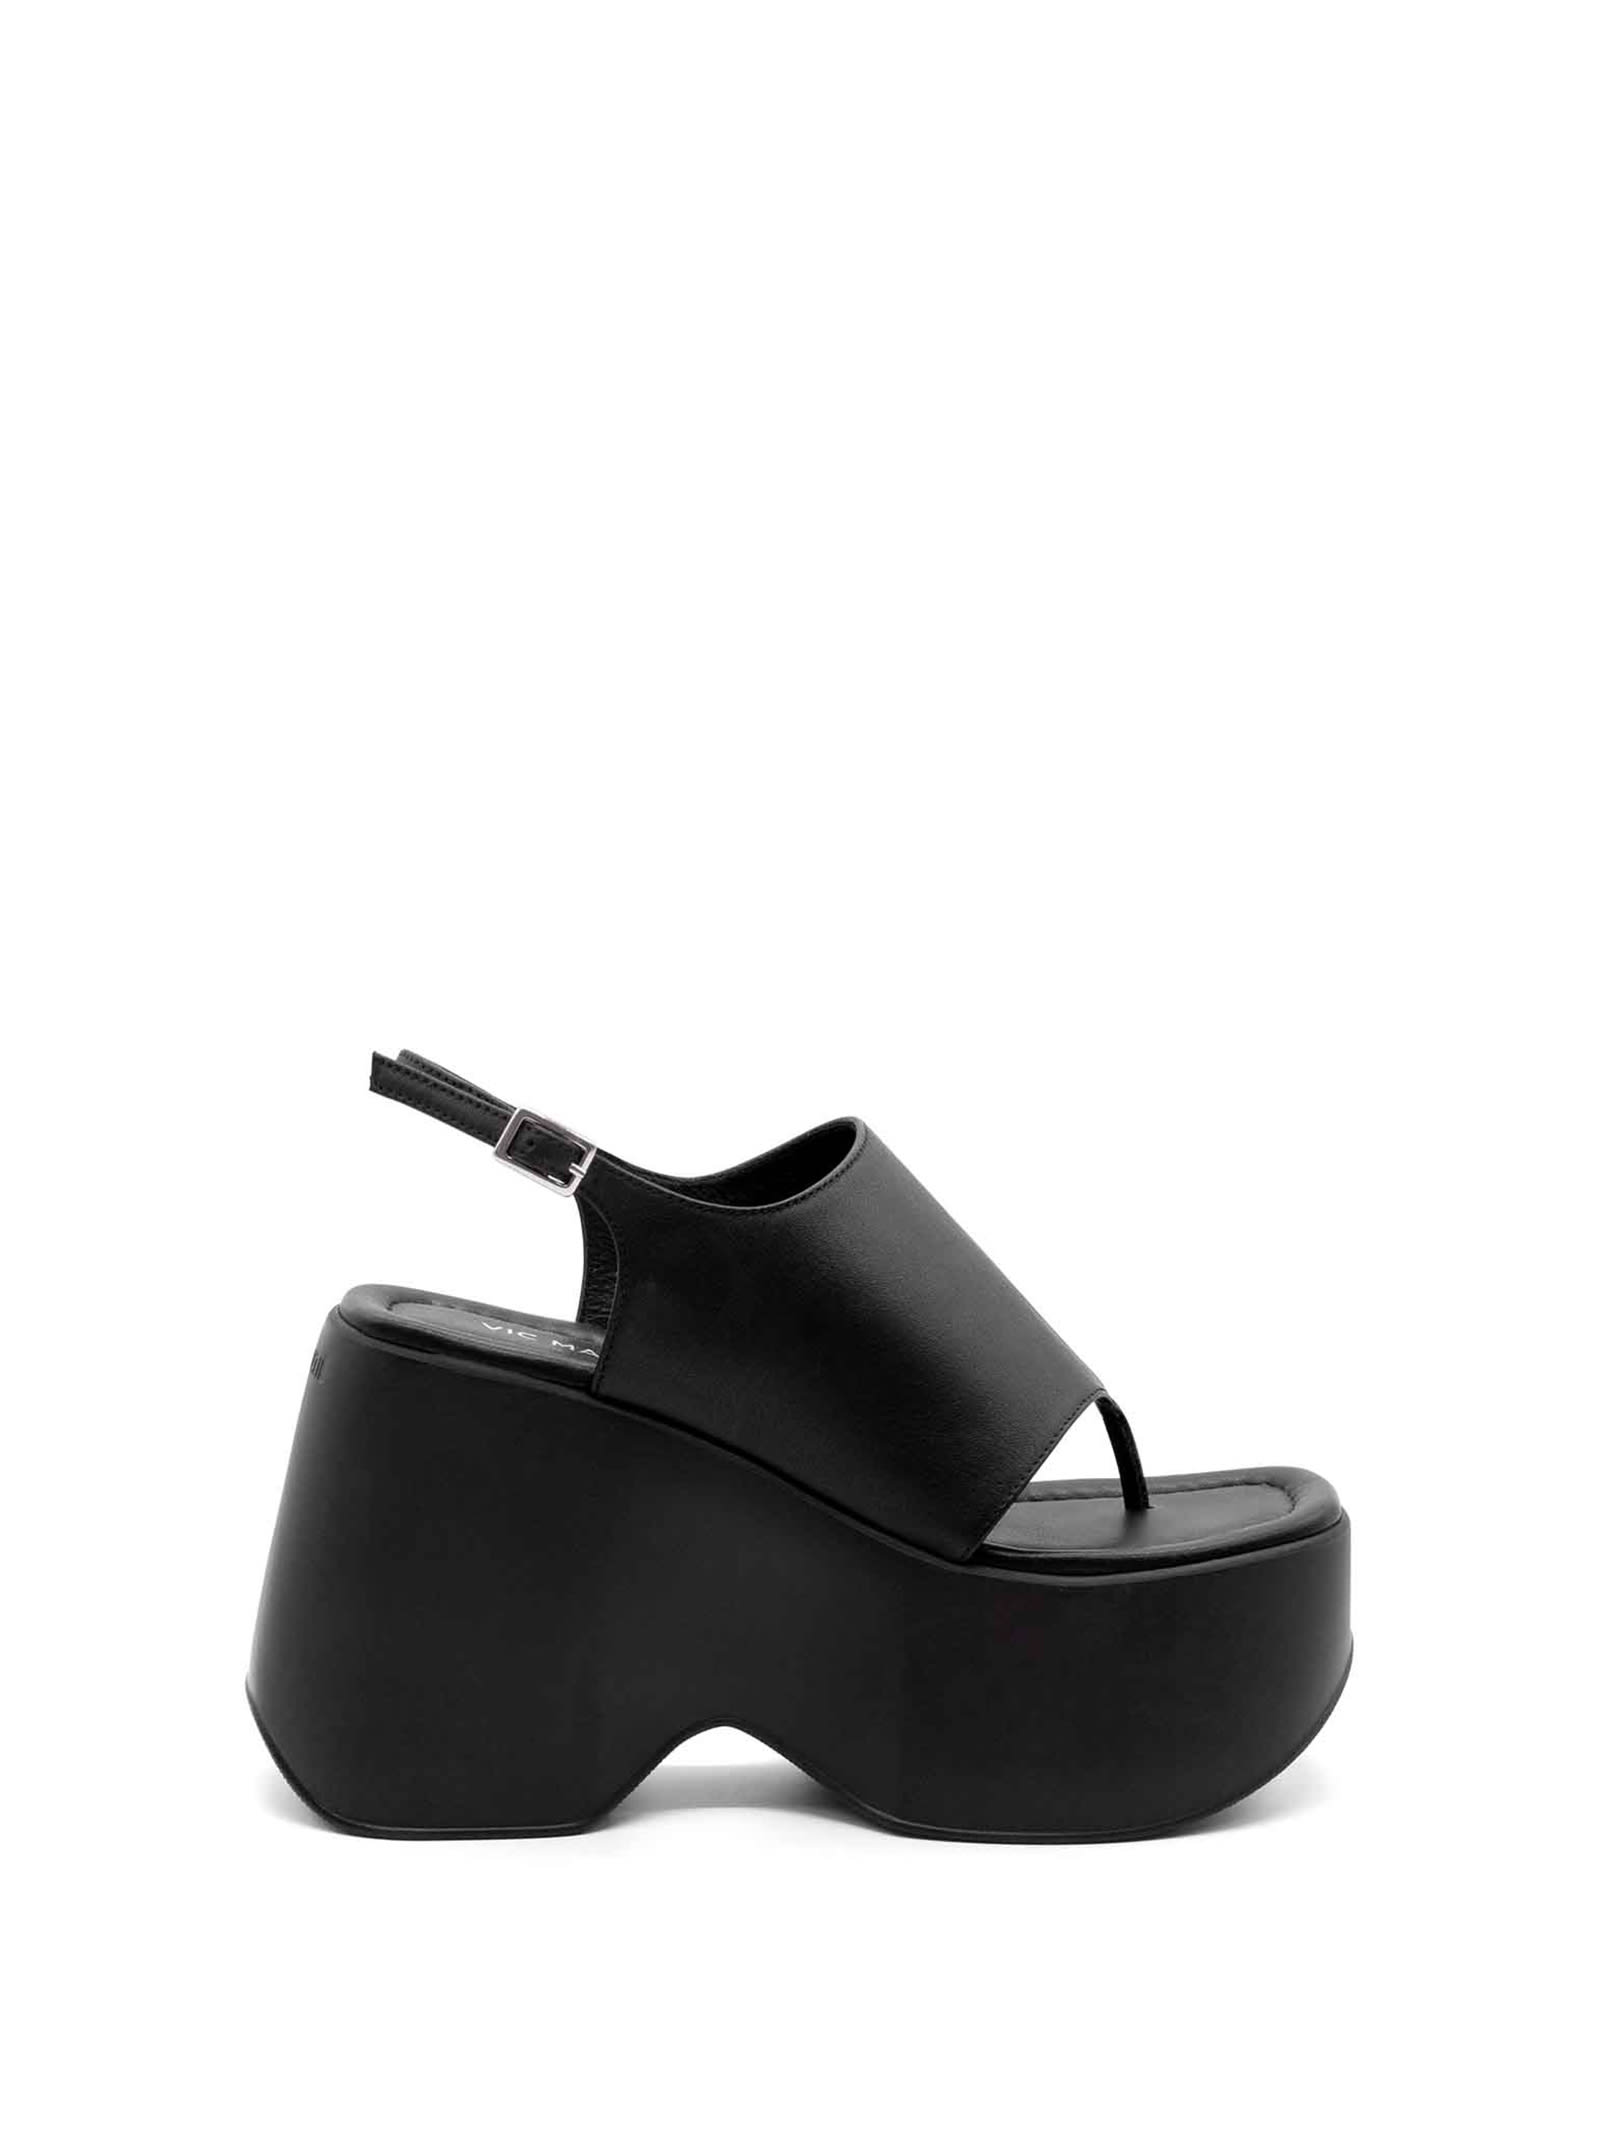 Vic Matié Black Leather Flip-flops With Wedge